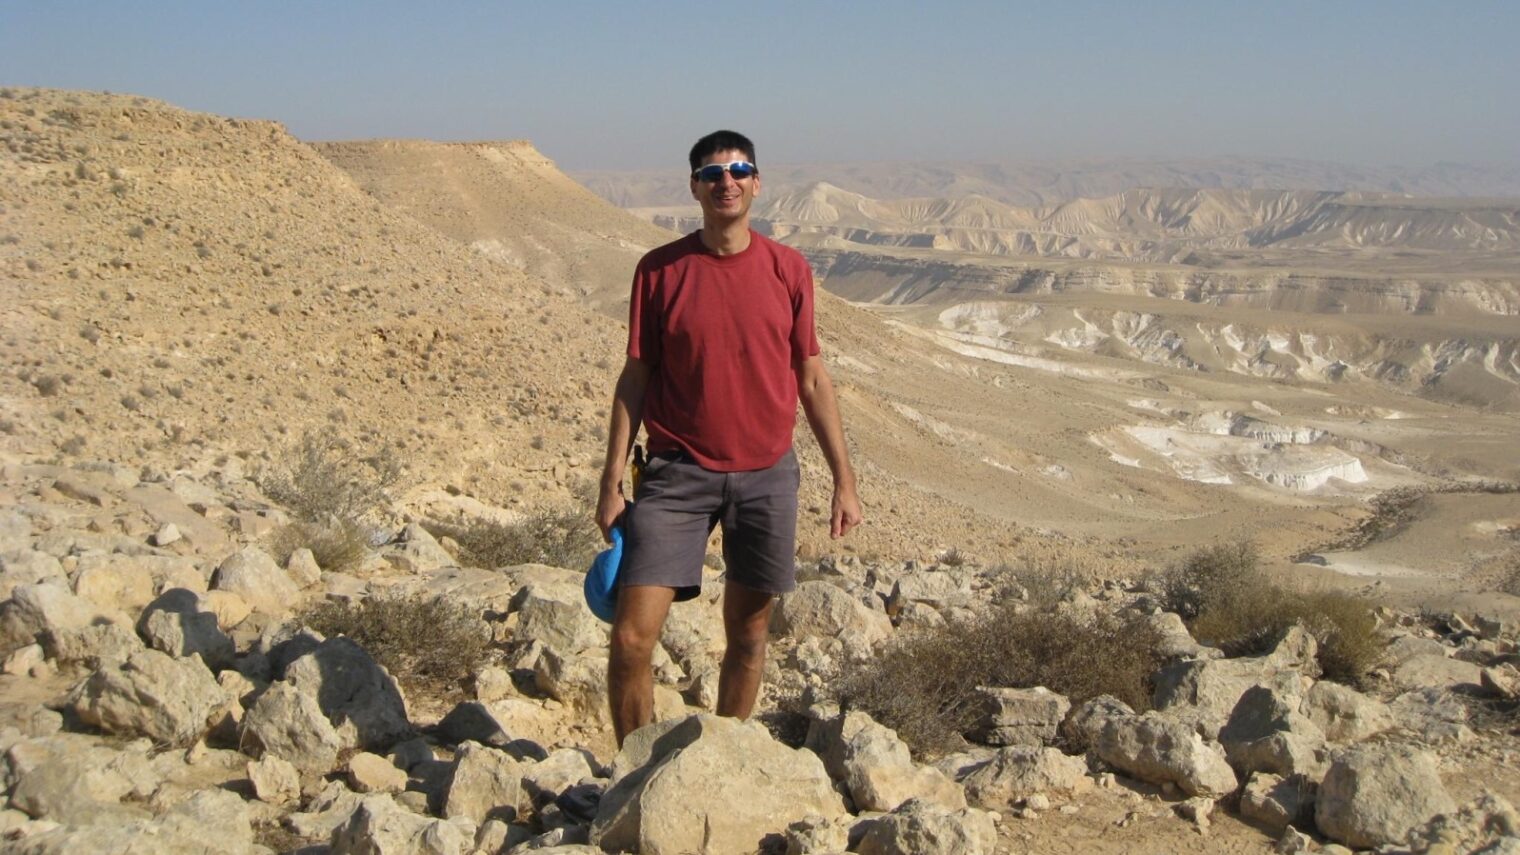 Erez Speiser of Israel by Foot hiking in Israel’s Zin Valley. Photo: courtesy